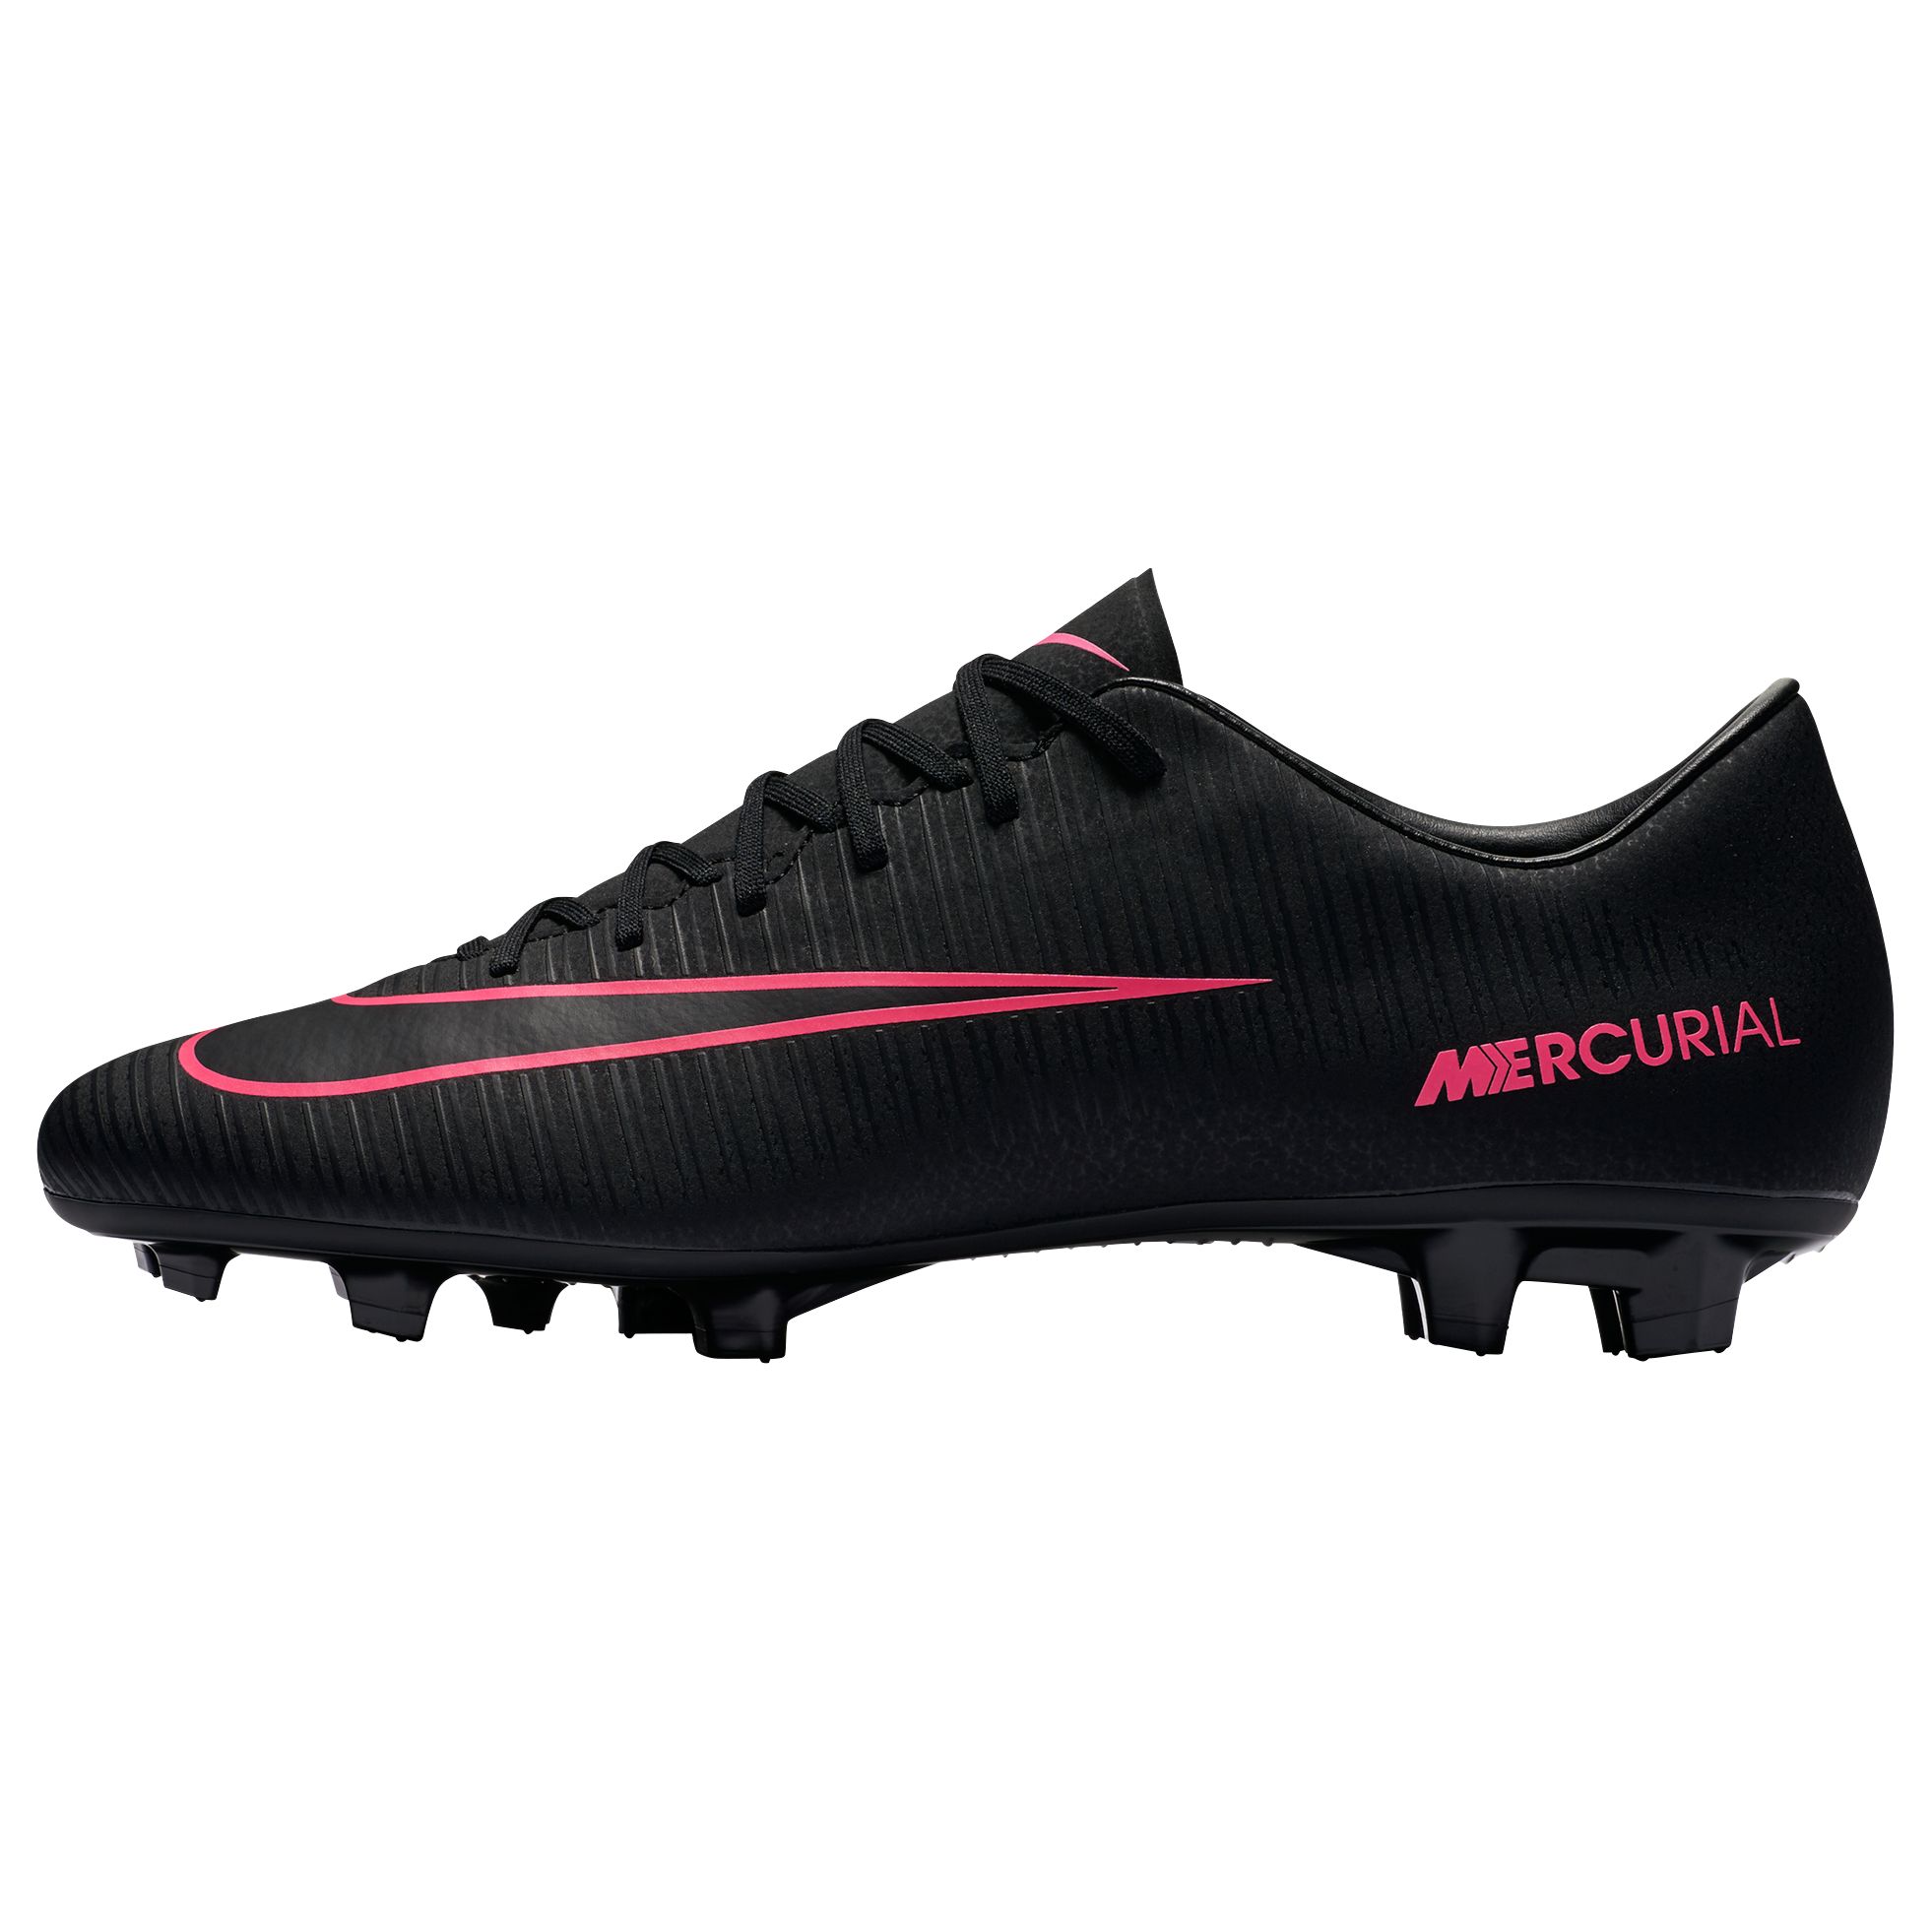 nike mercurial football boots black and pink